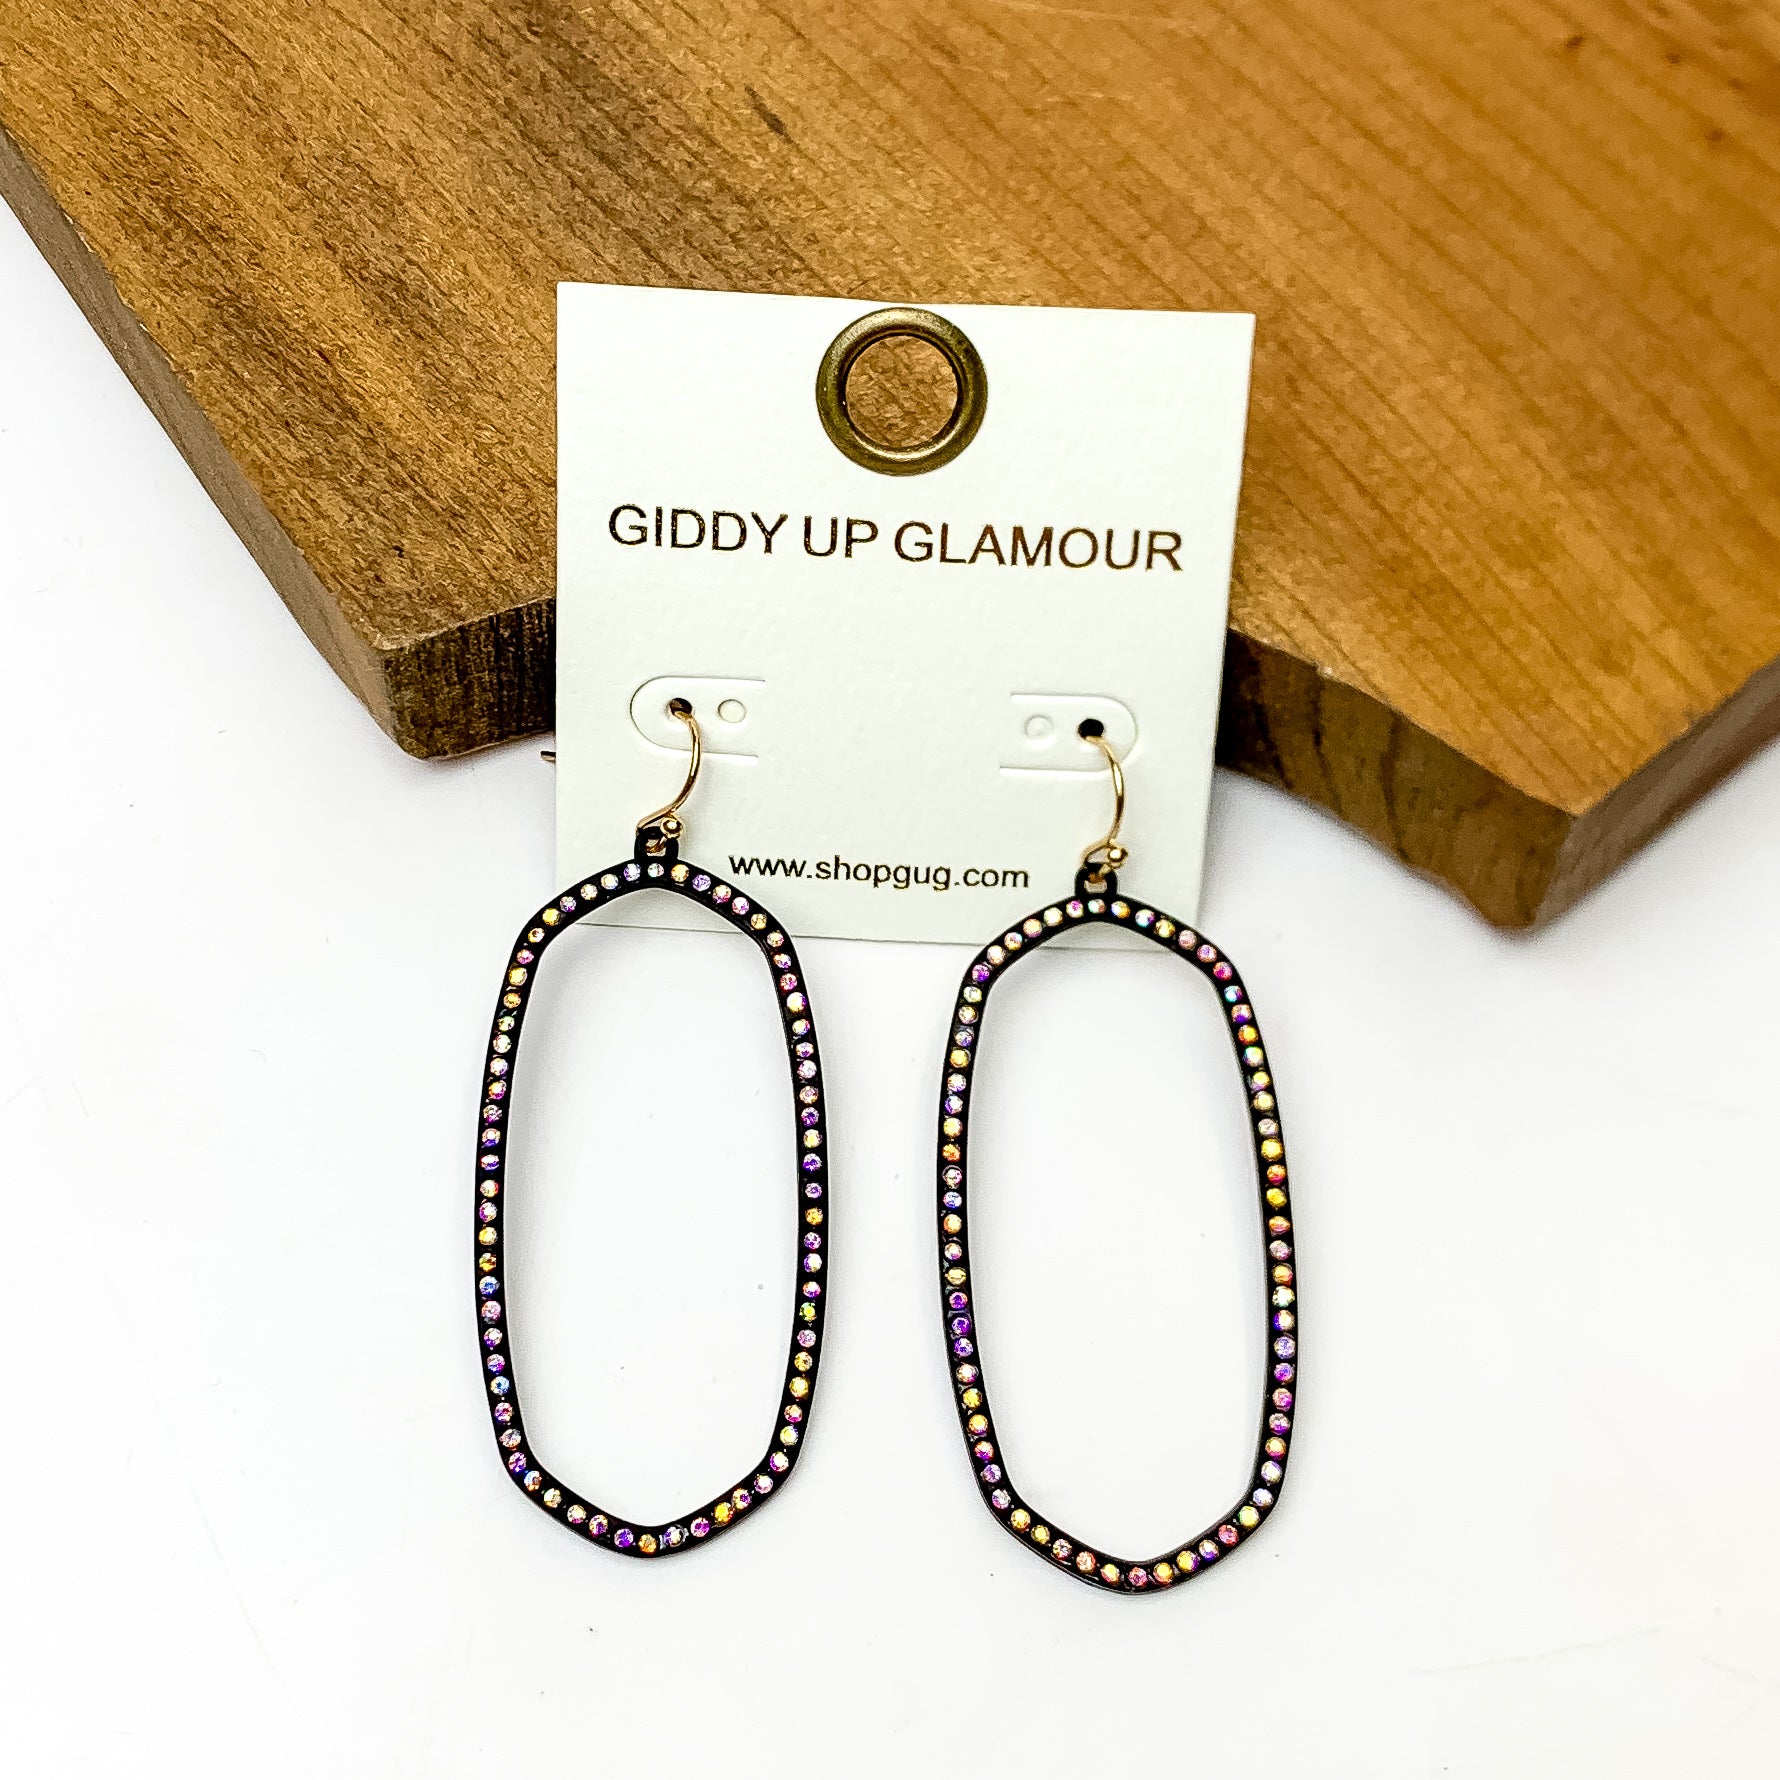 Sparkle Girl Open Oval Earrings in Black. These earrings are pictured laying against a wood piece with a white background.